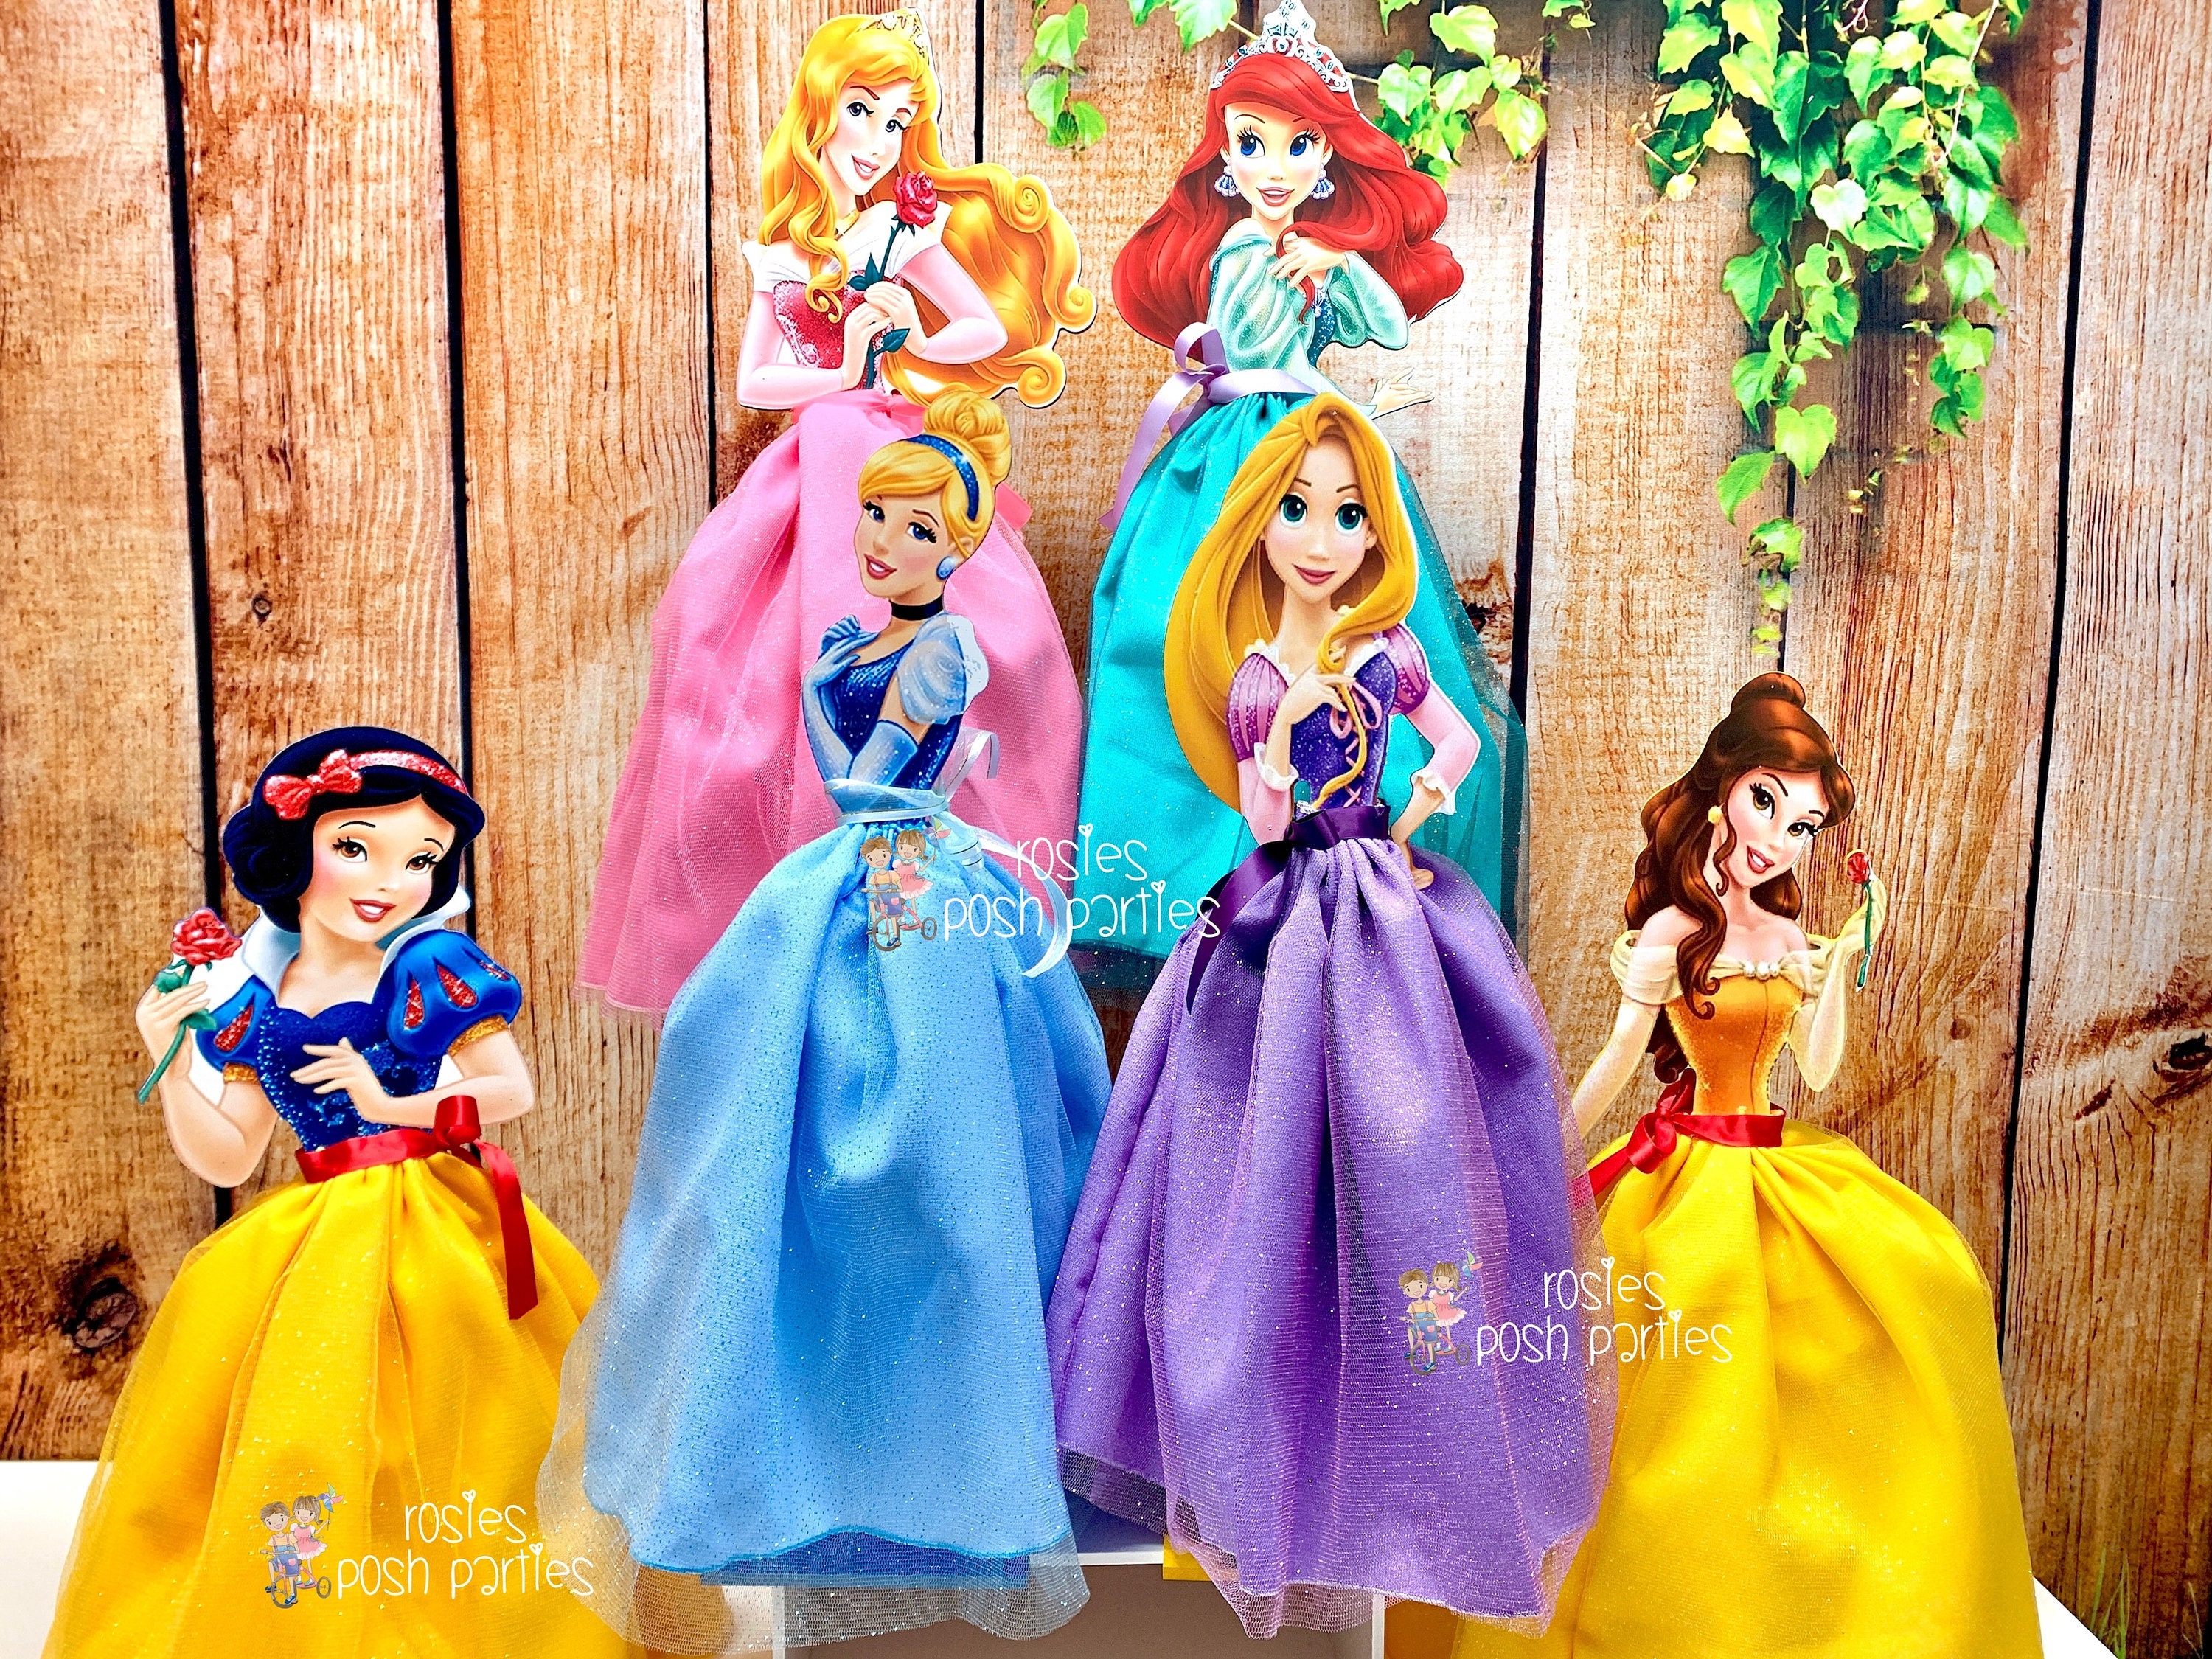 Pink Disney Princess Dolls Mermaid Snow White Cute Characters and Figurines Cake/Room/Party Decoration 8 Pieces Car Ornaments Gifts for Girls